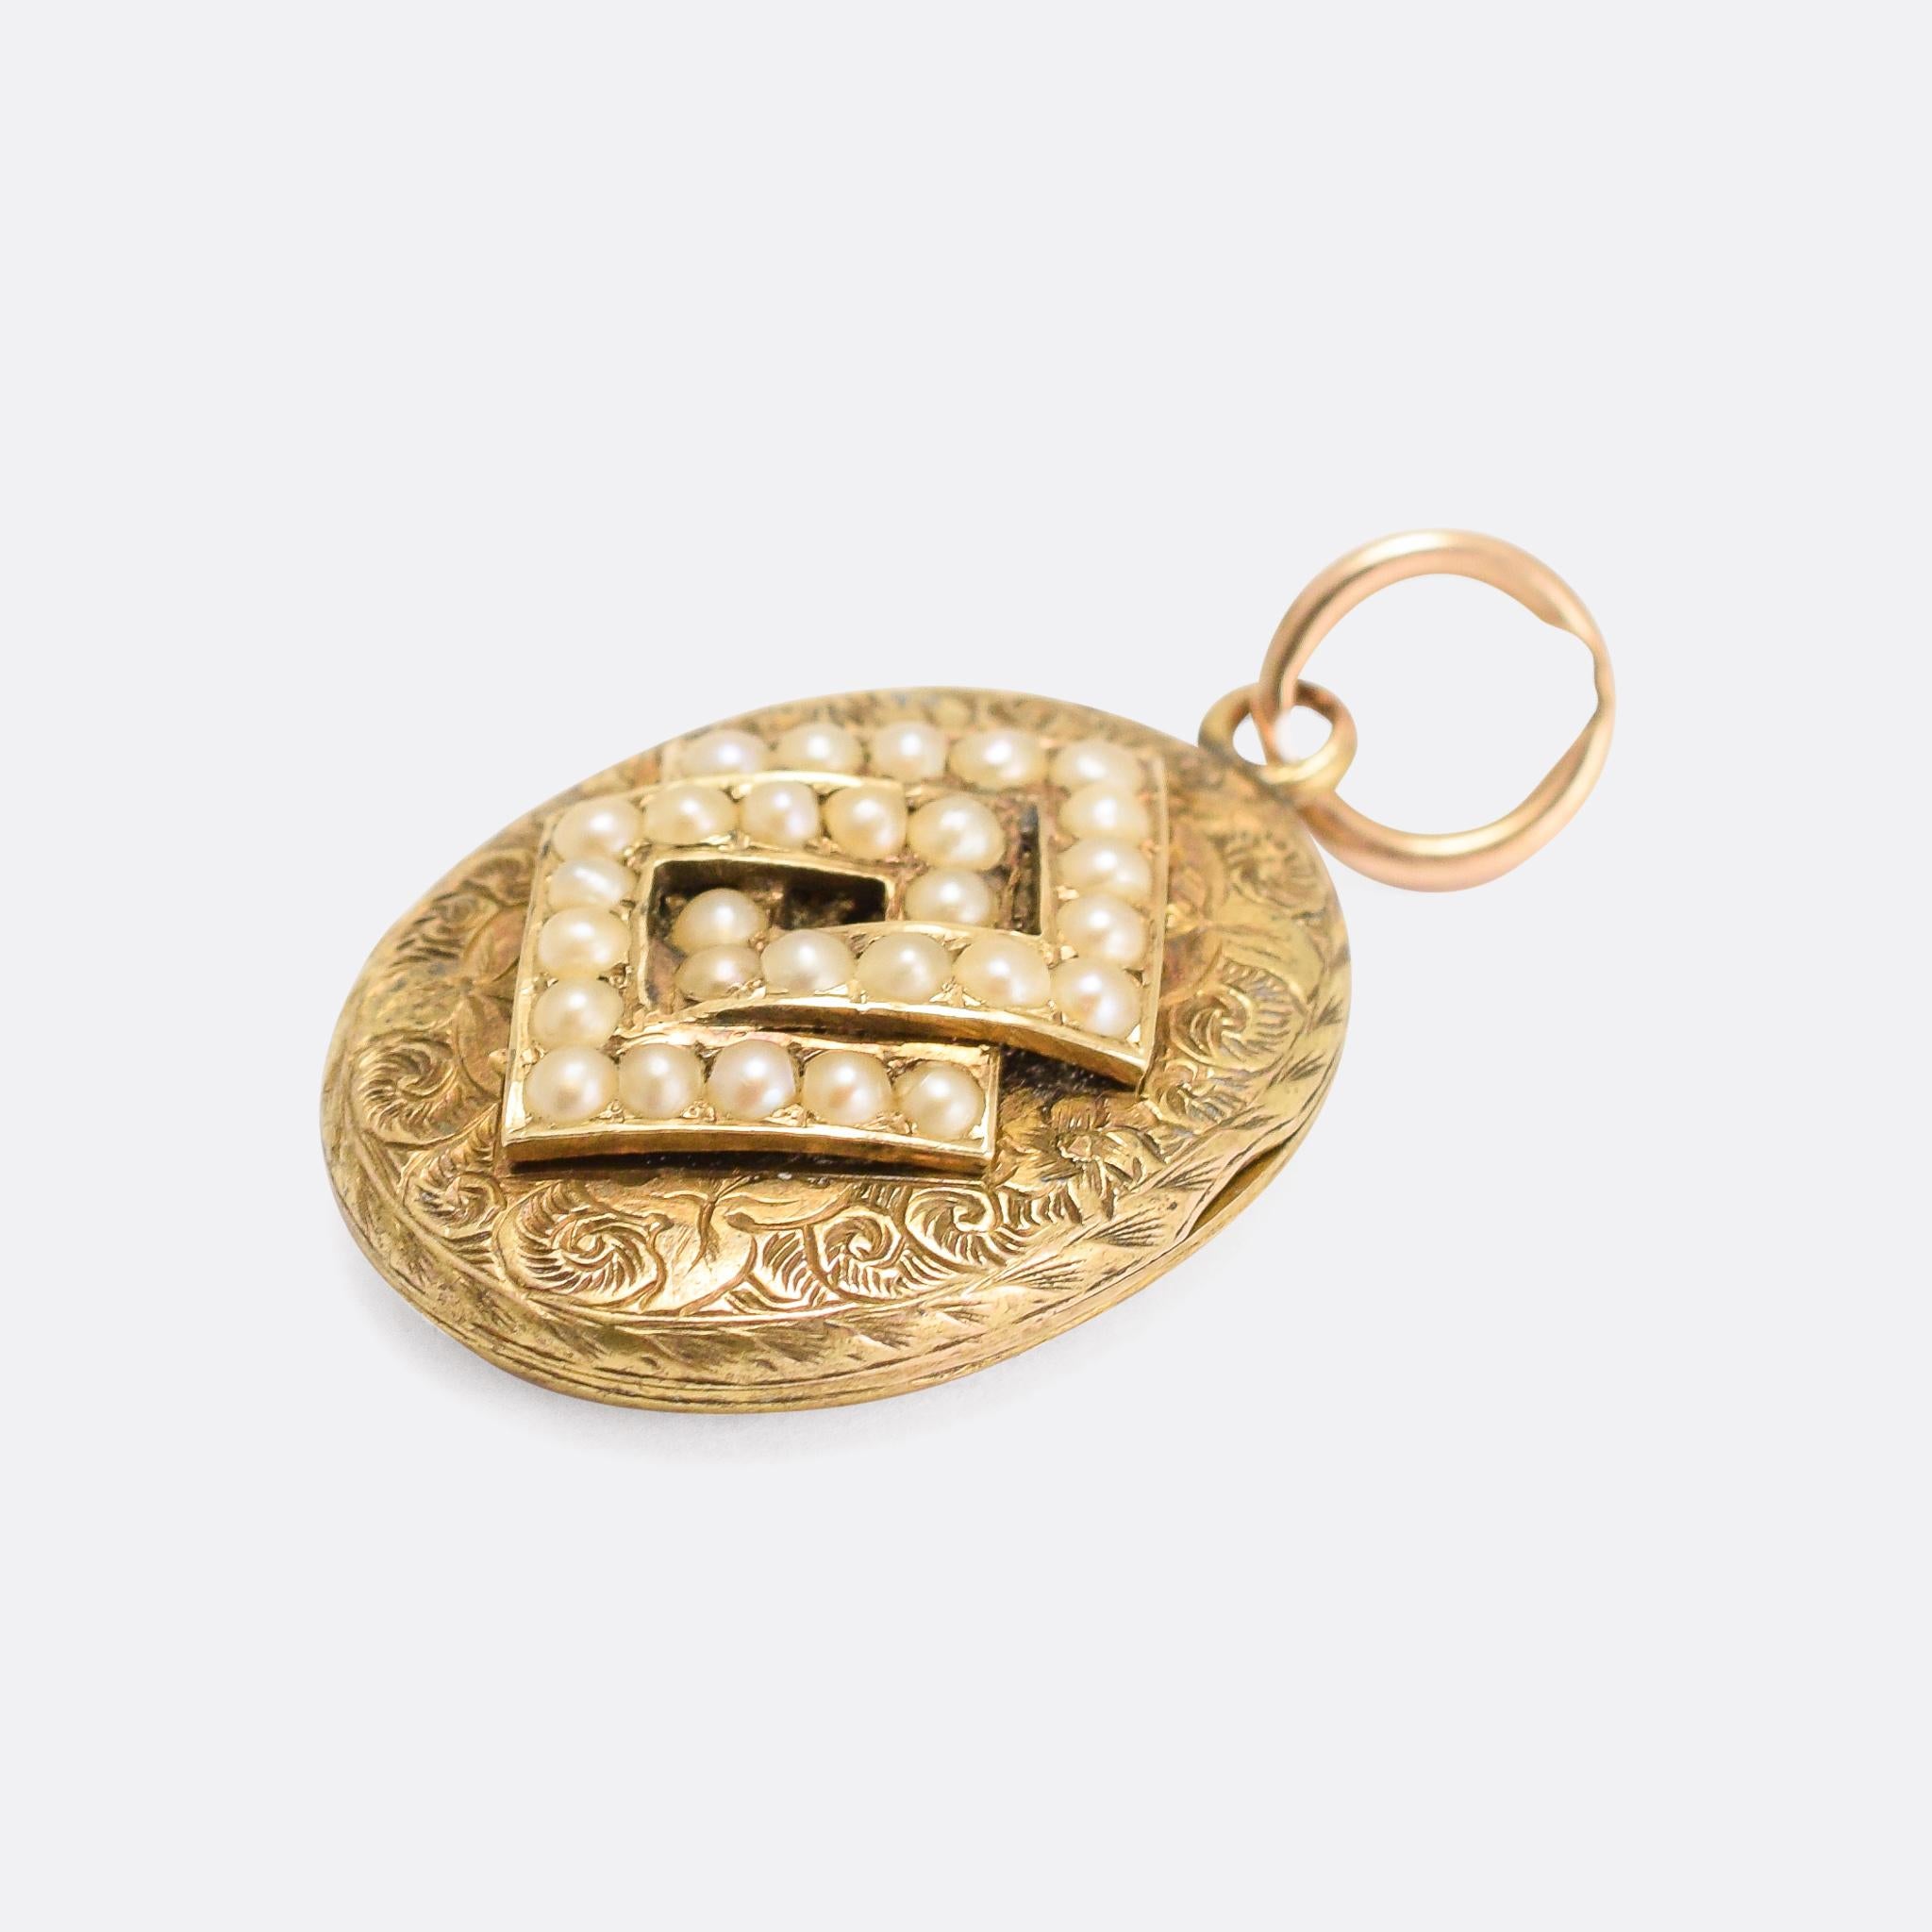 A beautiful antique pearl locket with interlinked squares on the front, set on a hand-chased backdrop and with a fully chased back. It's modelled in 15 karat yellow gold, and dates from the Victorian period, circa 1880

STONES 
Pearls

MEASUREMENTS